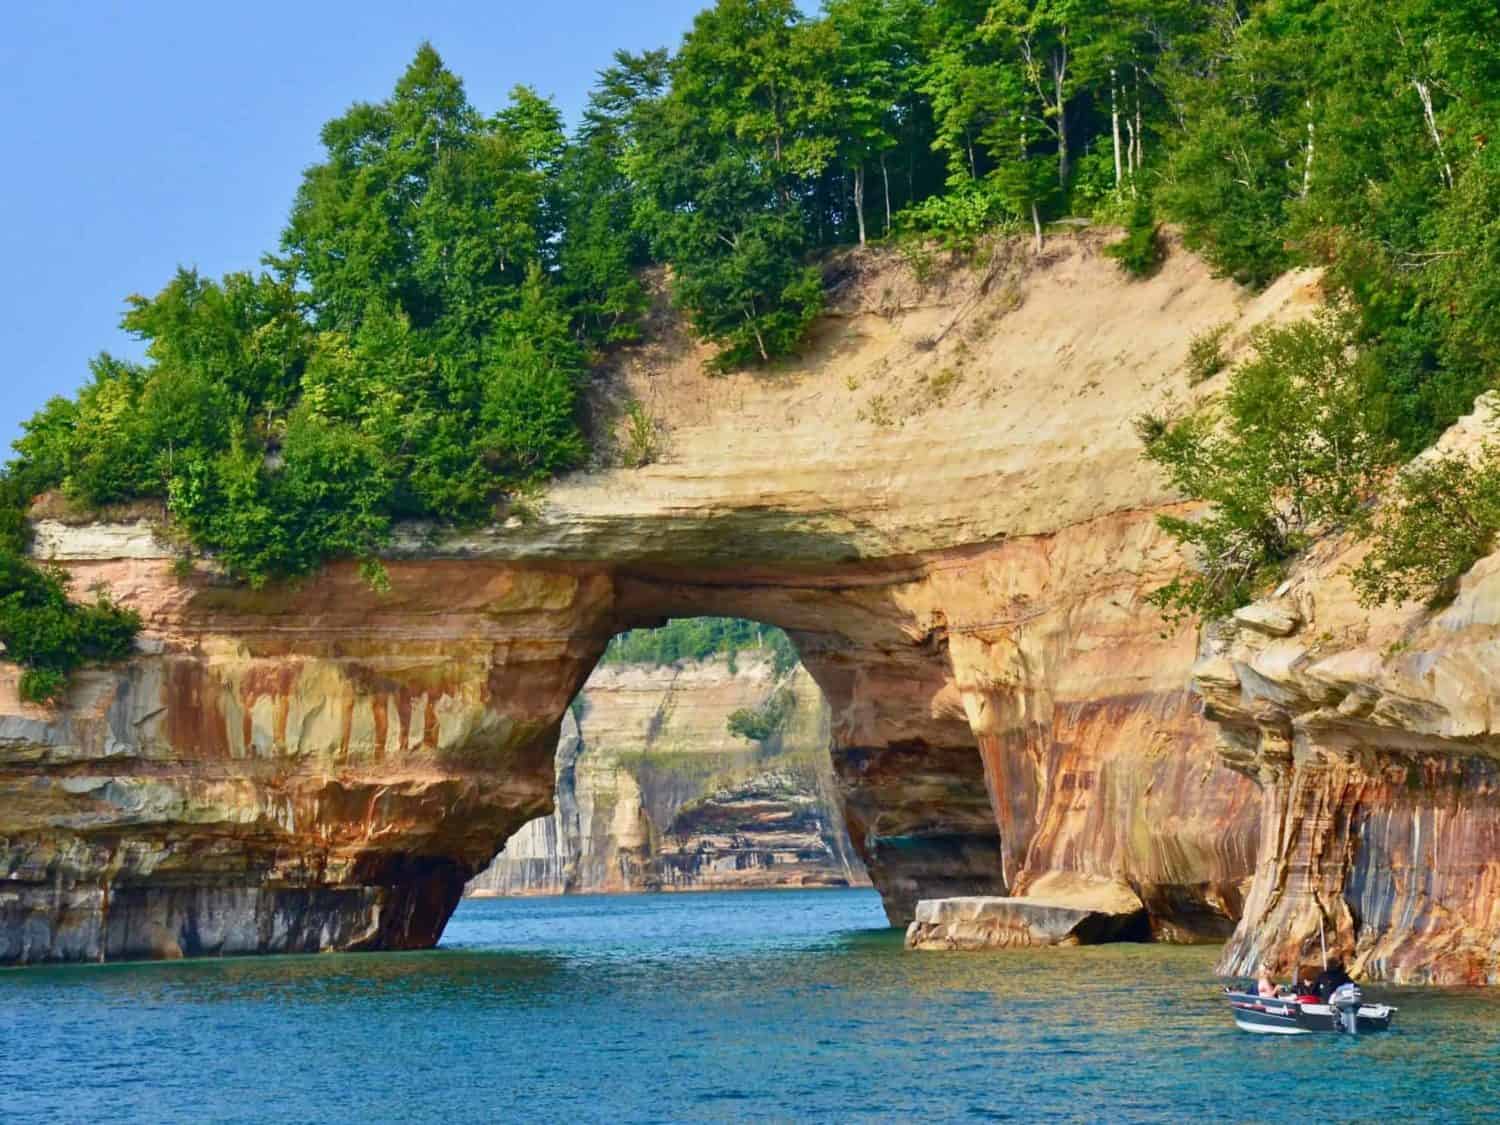 Exploring Pictured Rocks National Lakeshore on a Trip to Michigan